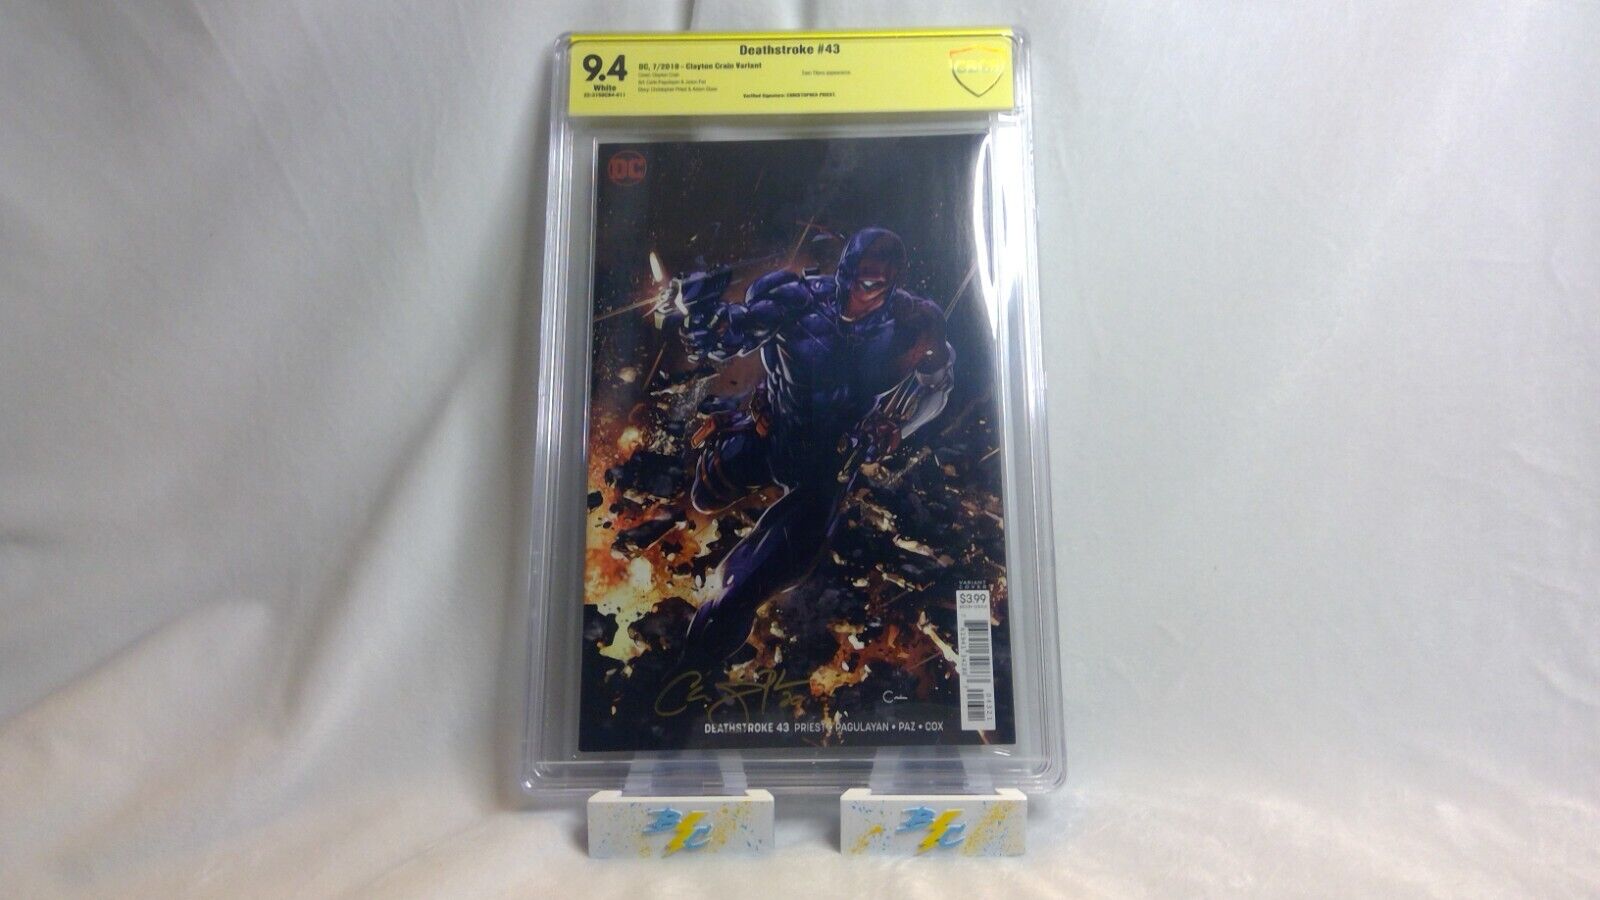 Deathstroke #43 Autographed CBCS graded 9.4